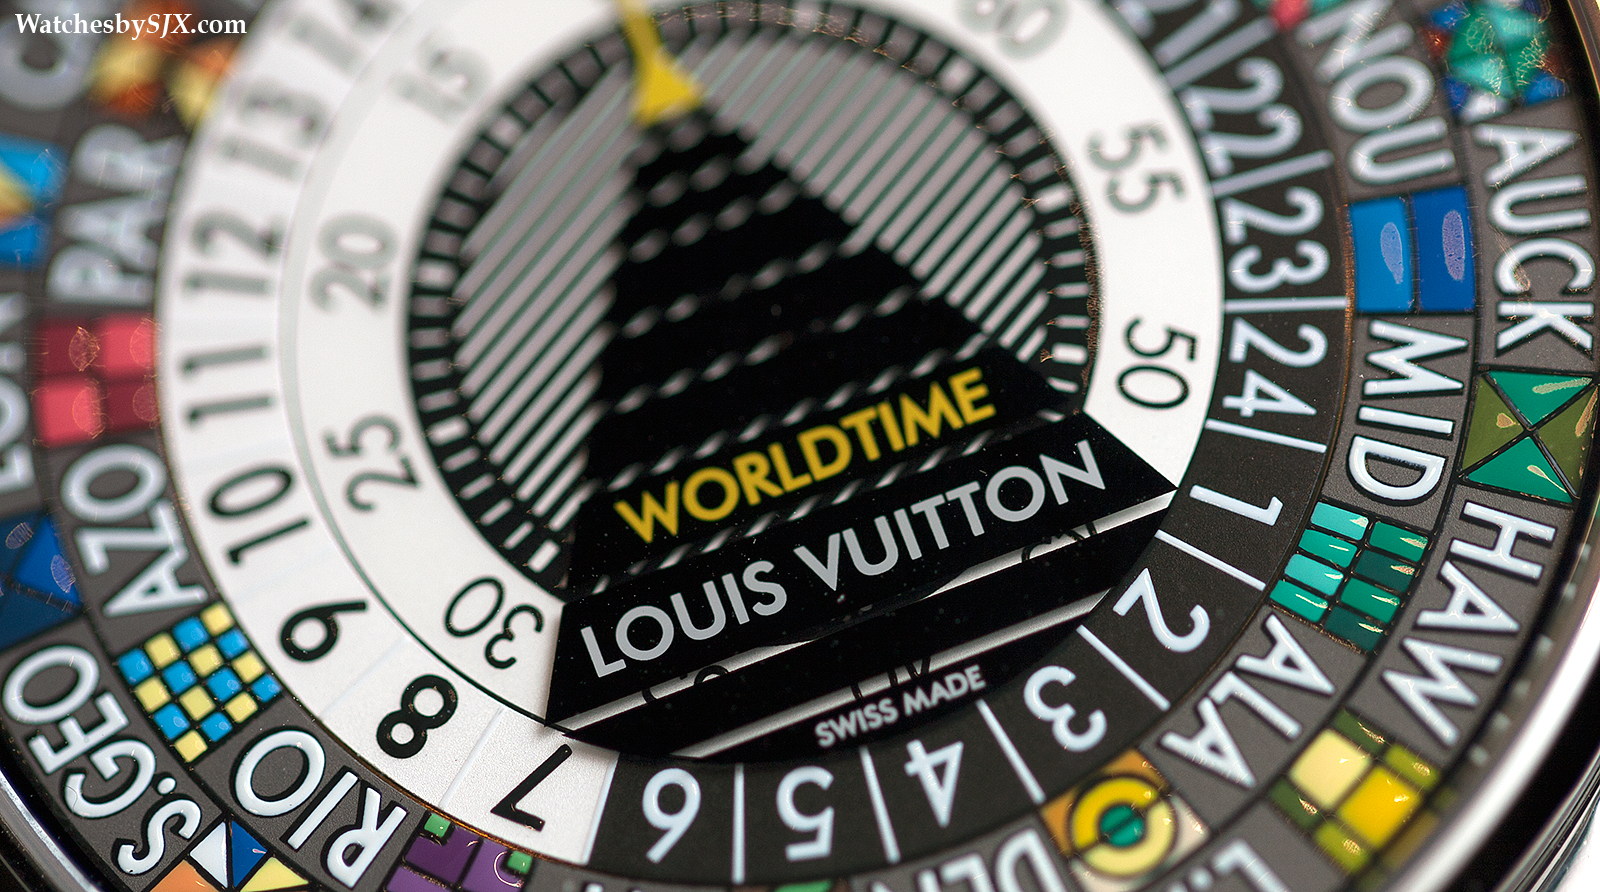 Hands-On With The Louis Vuitton Escale World Time Singapore